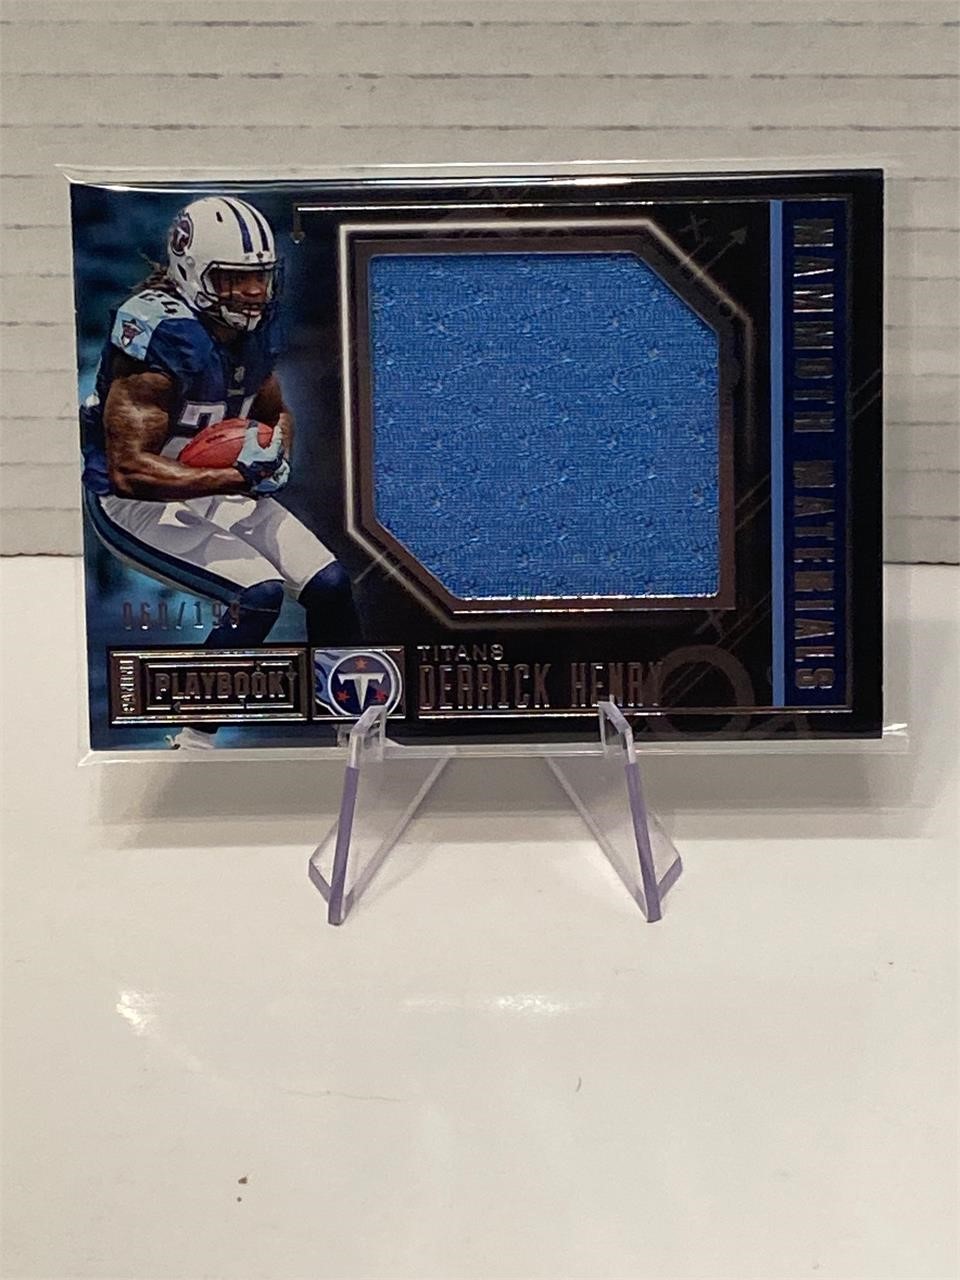 Derrick Henry Jersey/Numbered Card